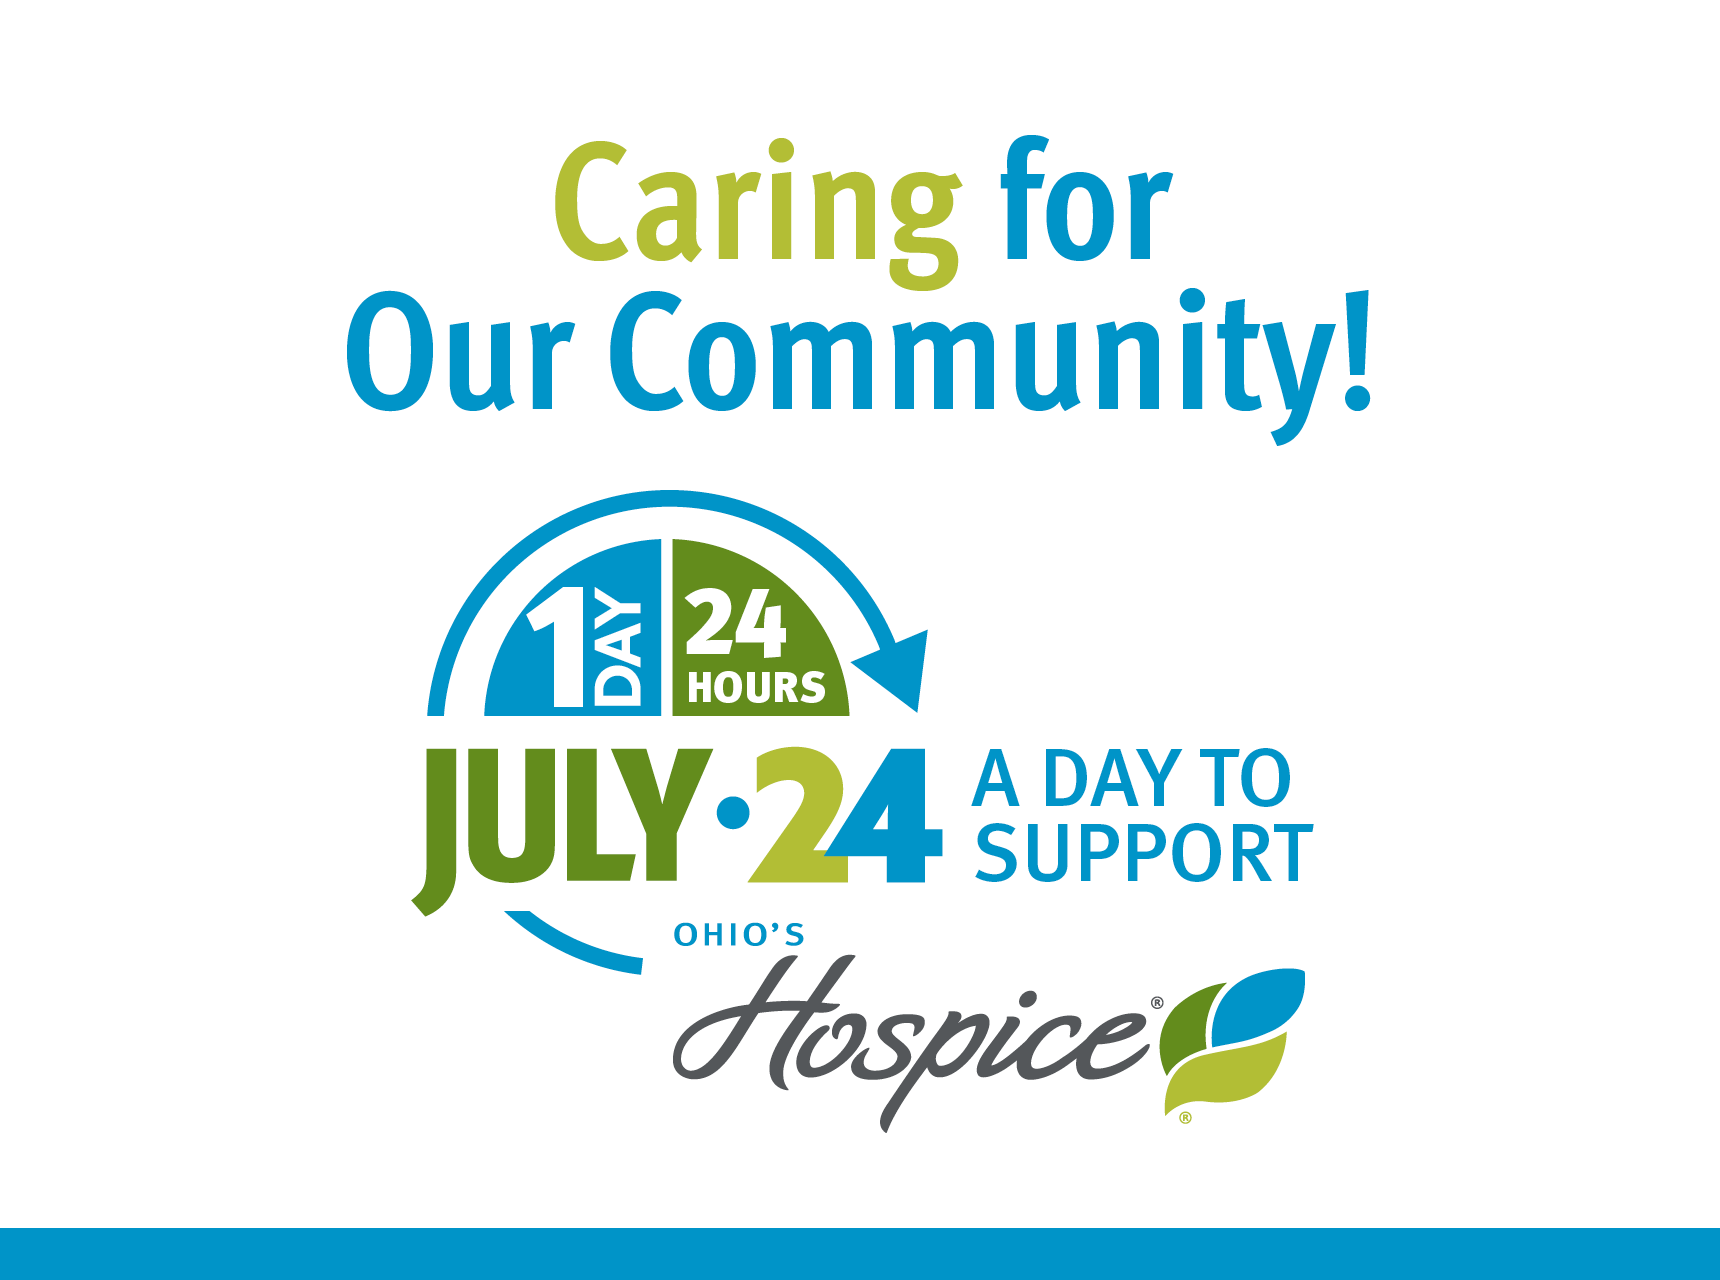 Caring for Our Community! July 24, A Day To Support